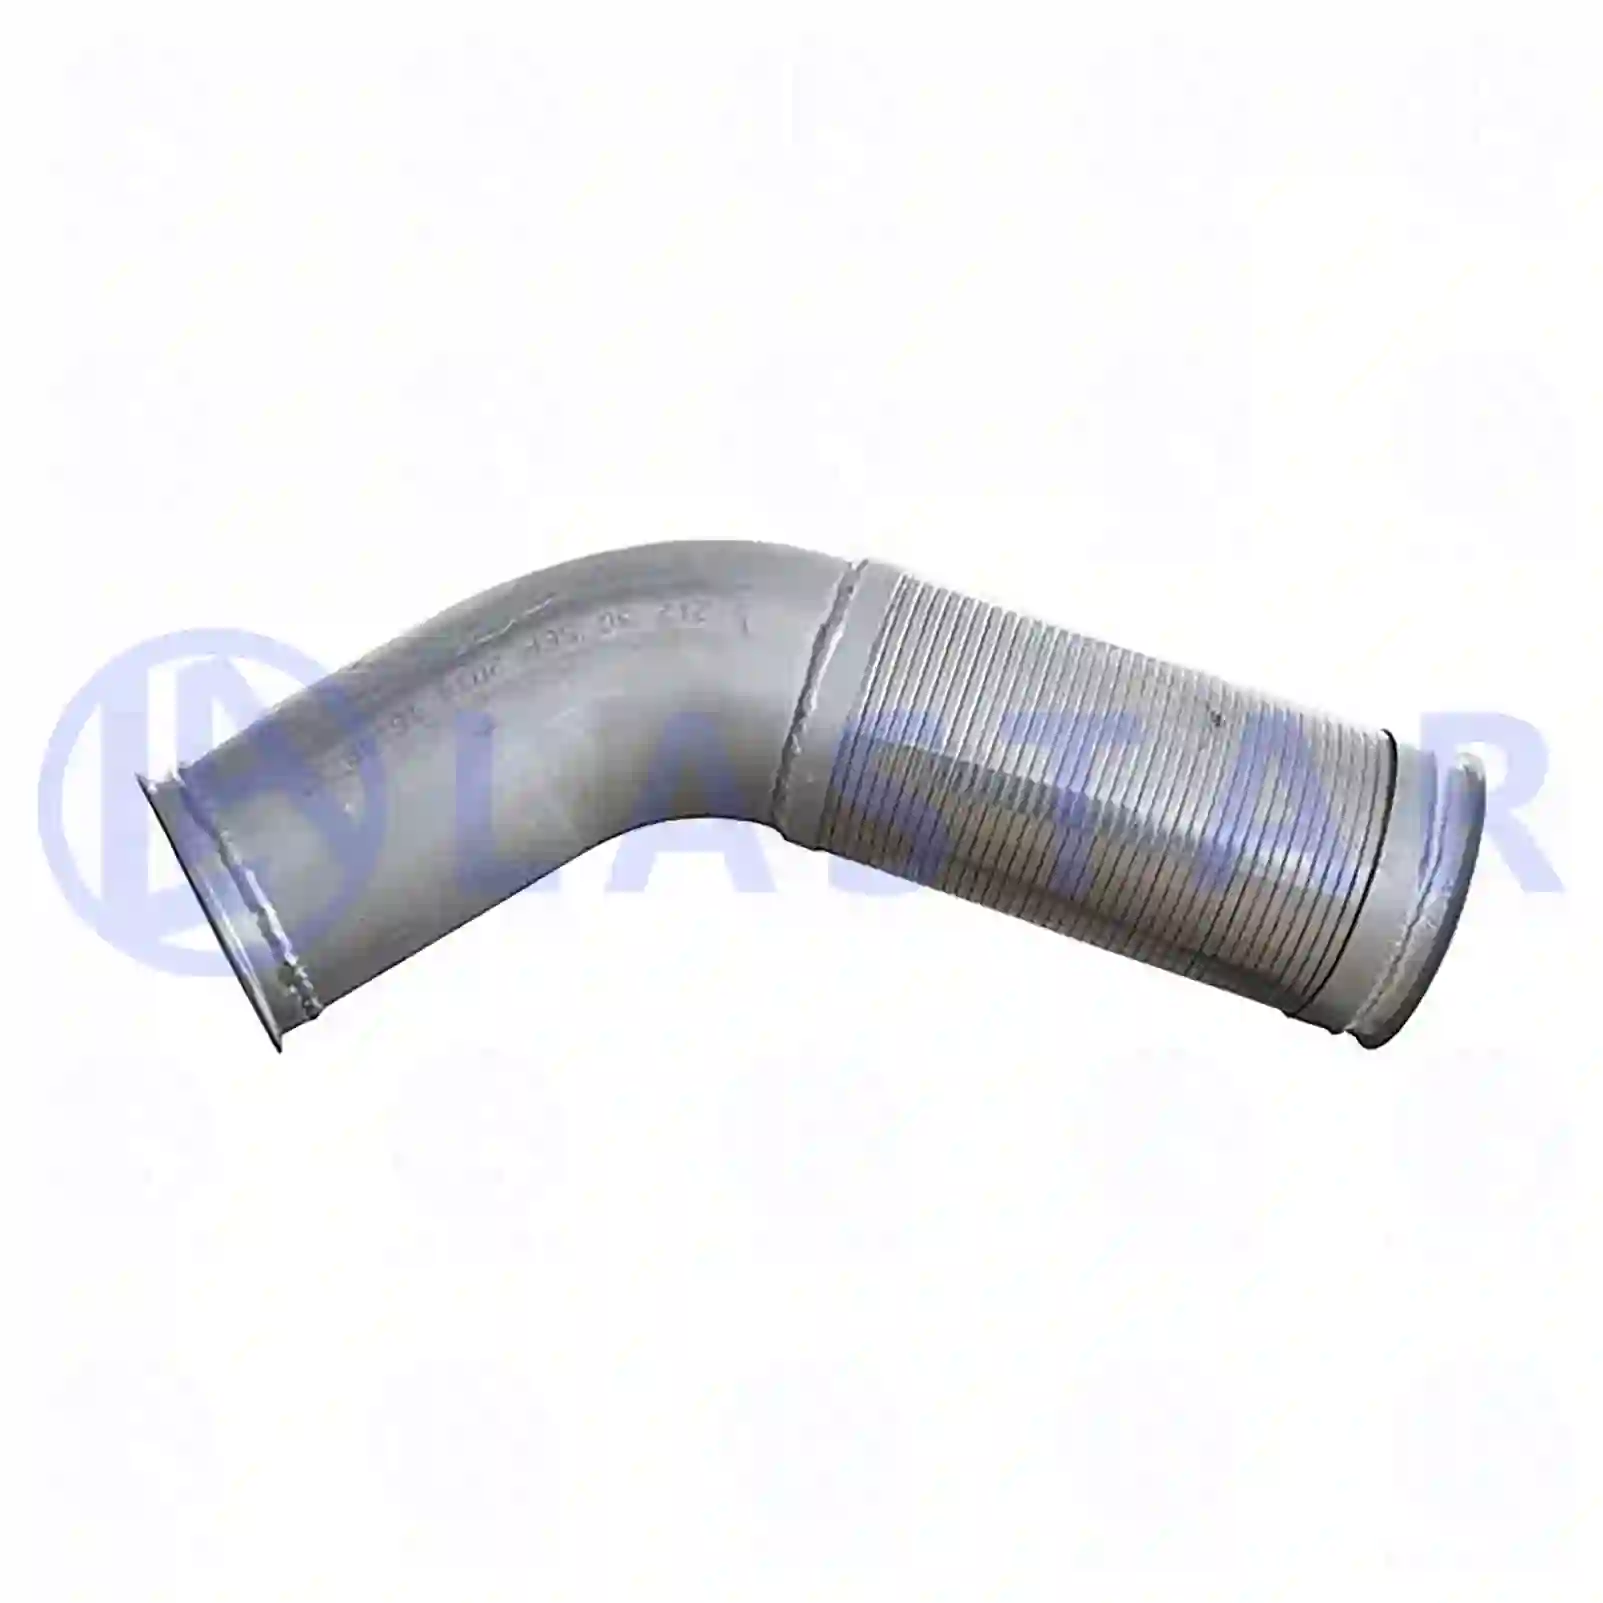 Front exhaust pipe, 77707003, 1488557 ||  77707003 Lastar Spare Part | Truck Spare Parts, Auotomotive Spare Parts Front exhaust pipe, 77707003, 1488557 ||  77707003 Lastar Spare Part | Truck Spare Parts, Auotomotive Spare Parts